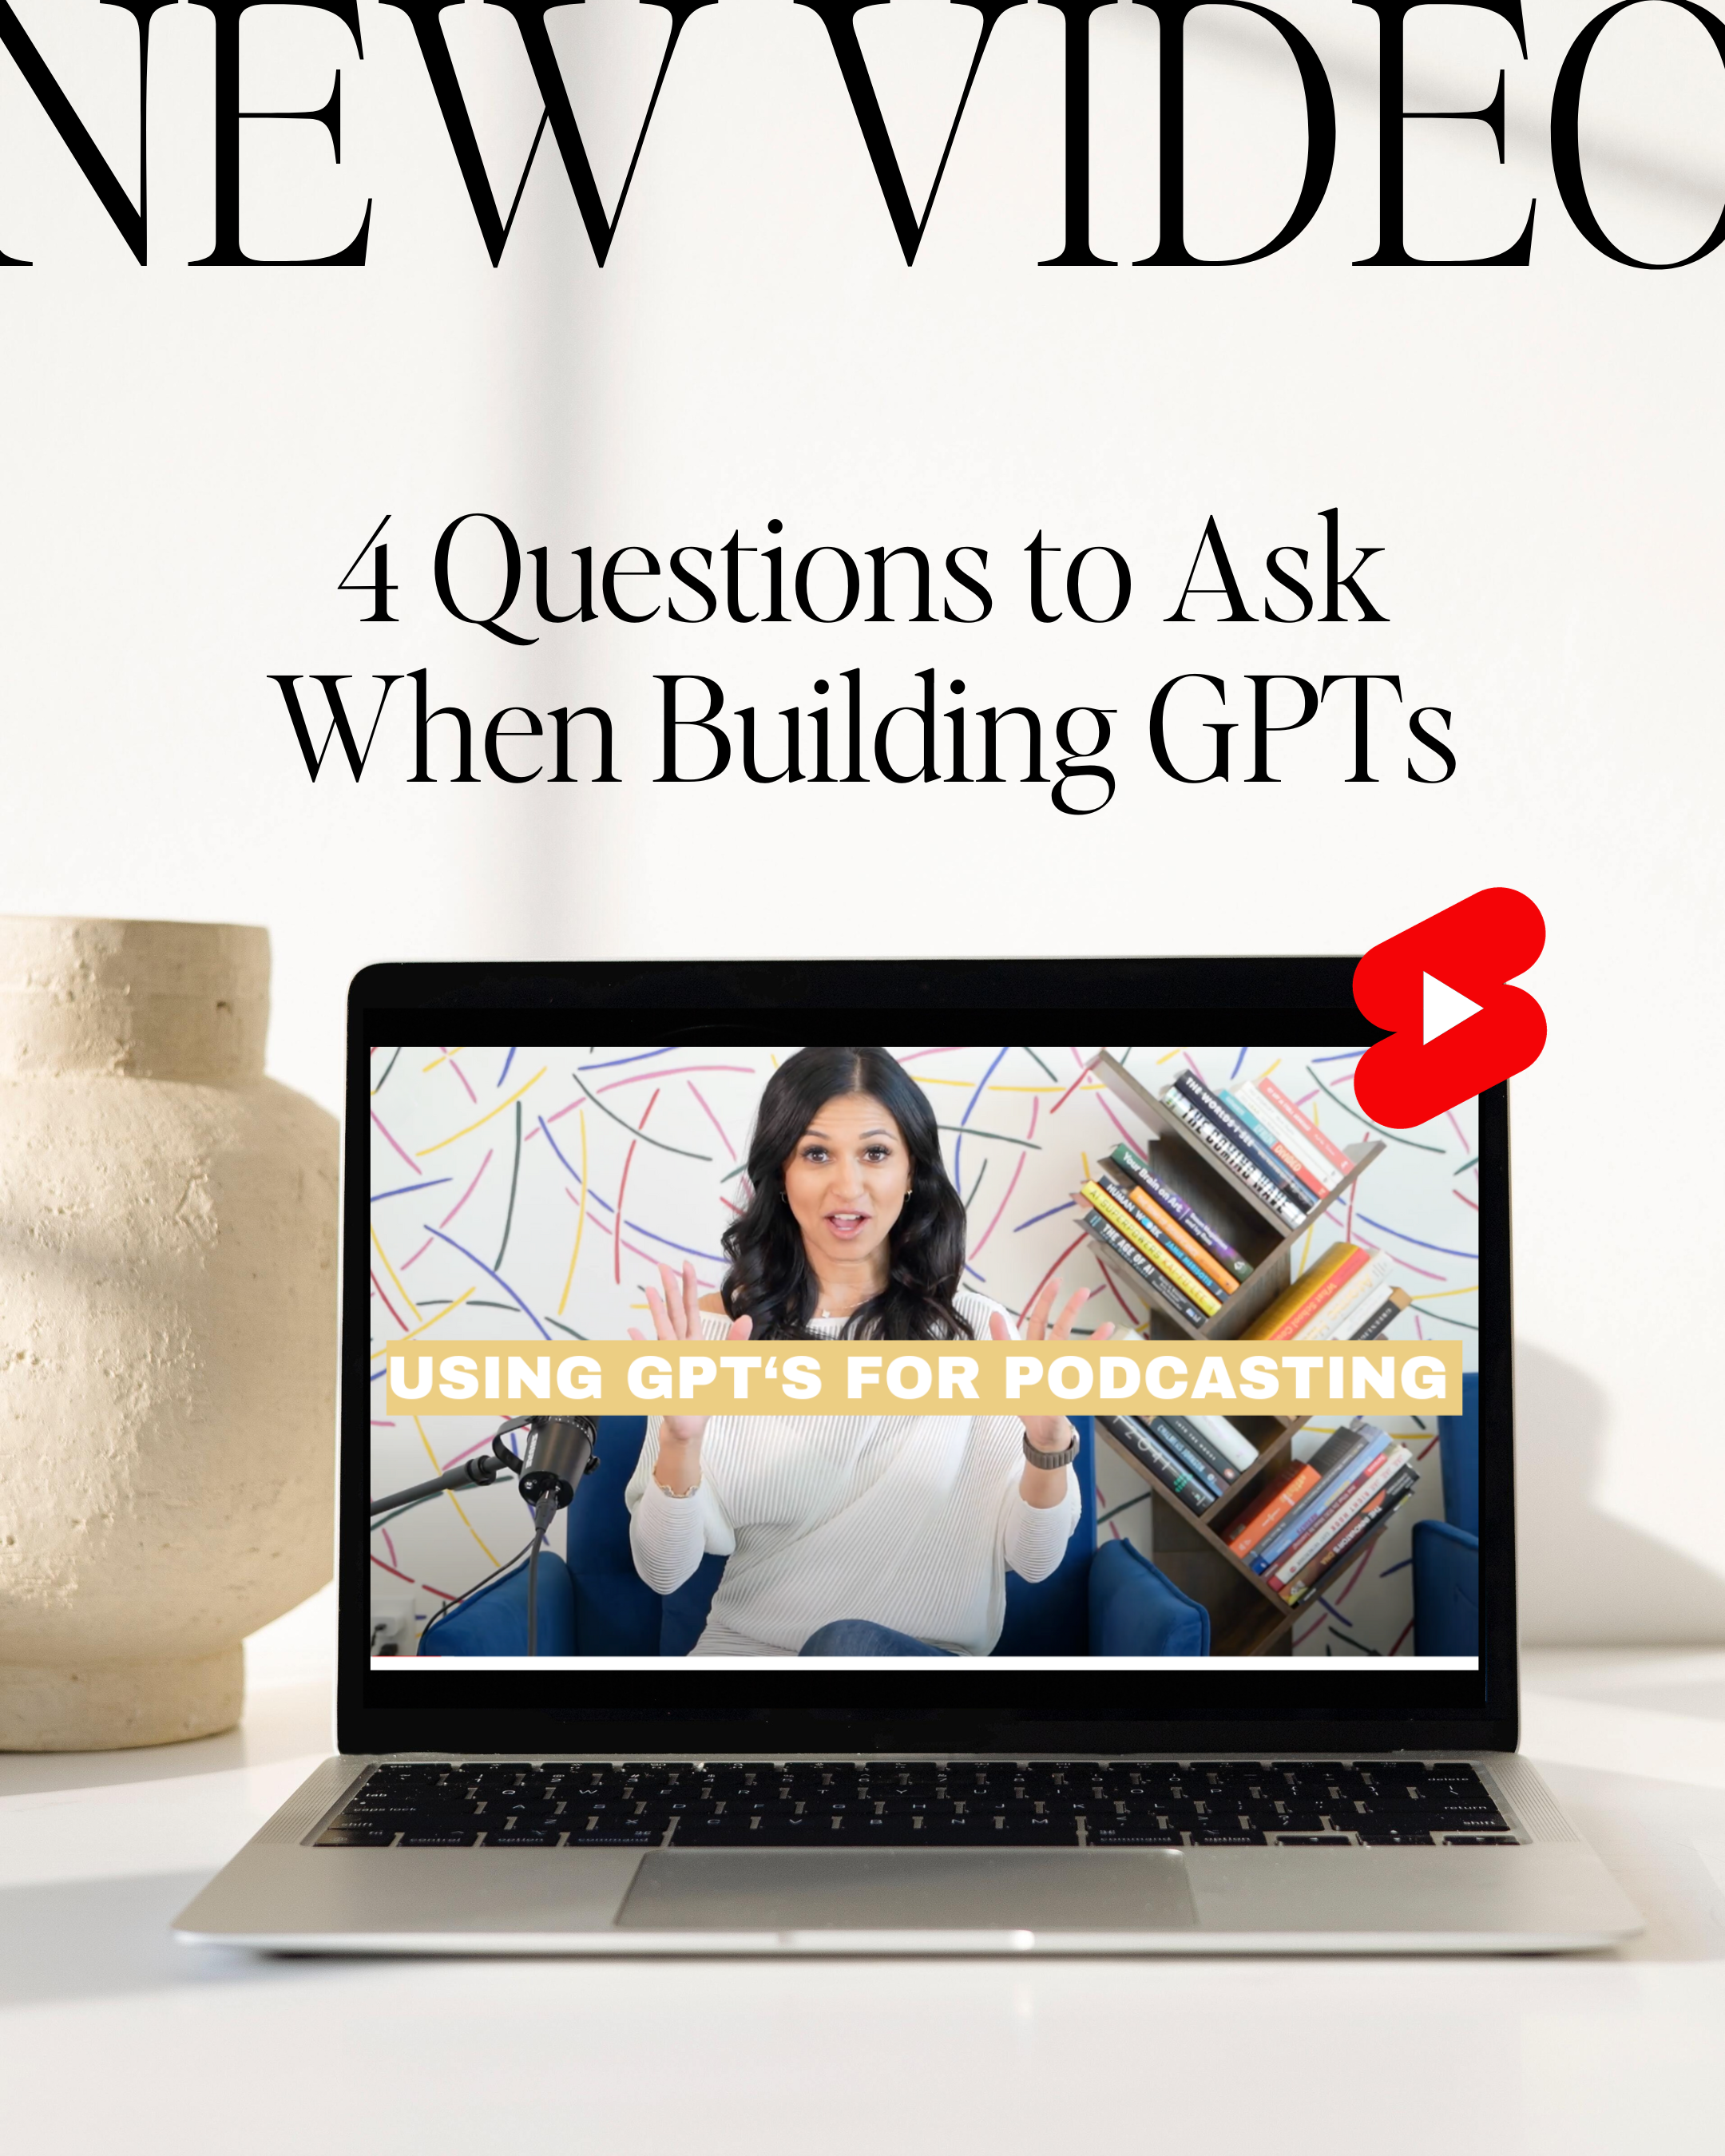 4 questions to ask when building GPTs